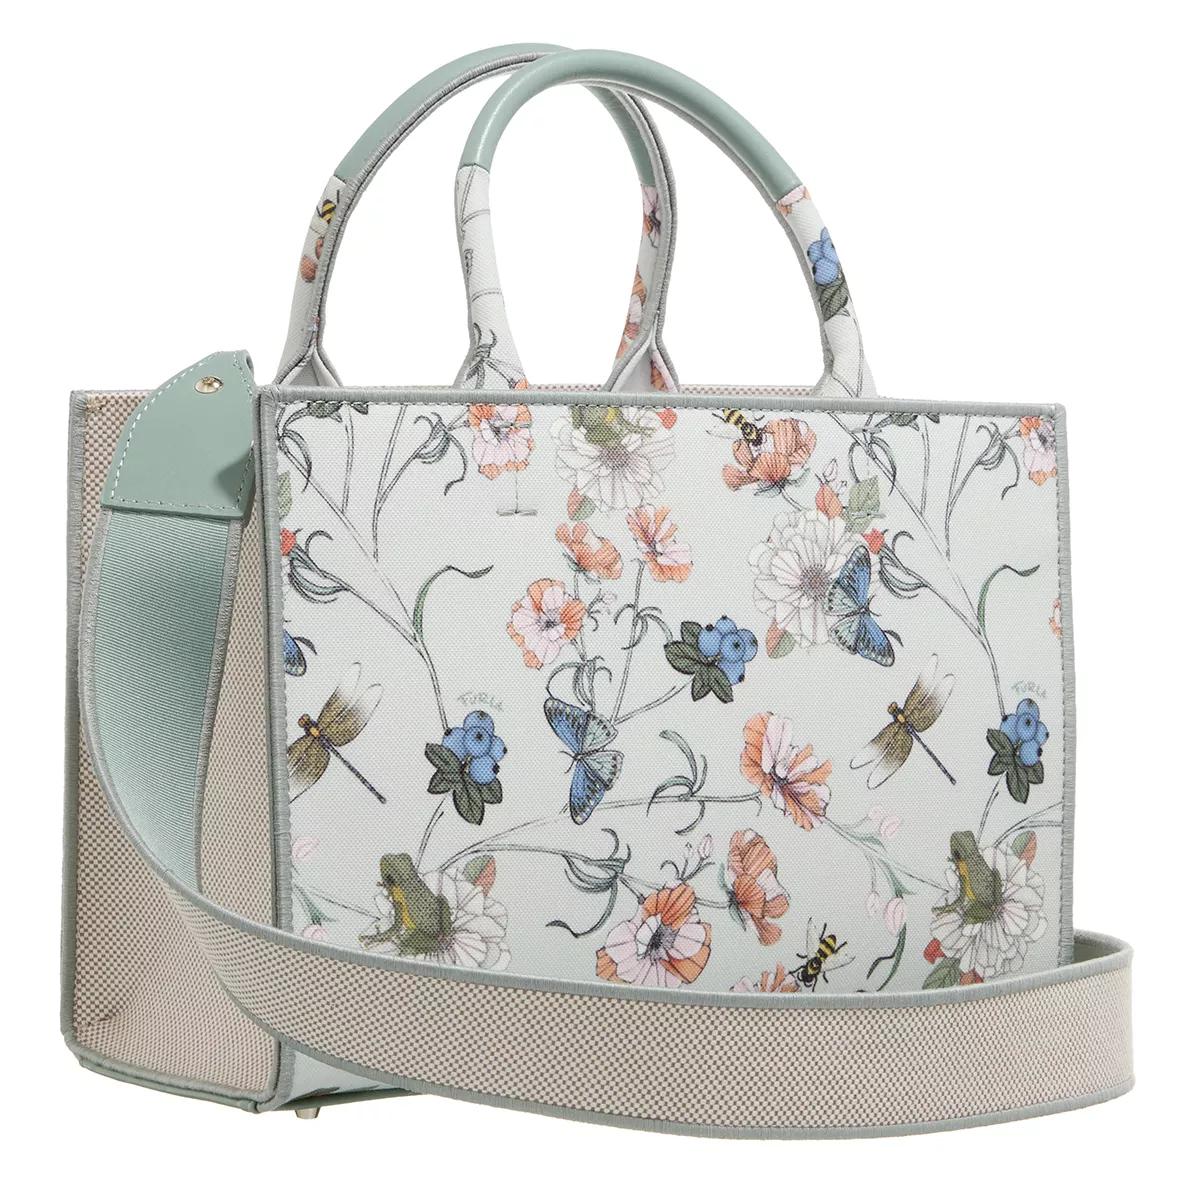 Furla Totes Opportunity S Tote in groen